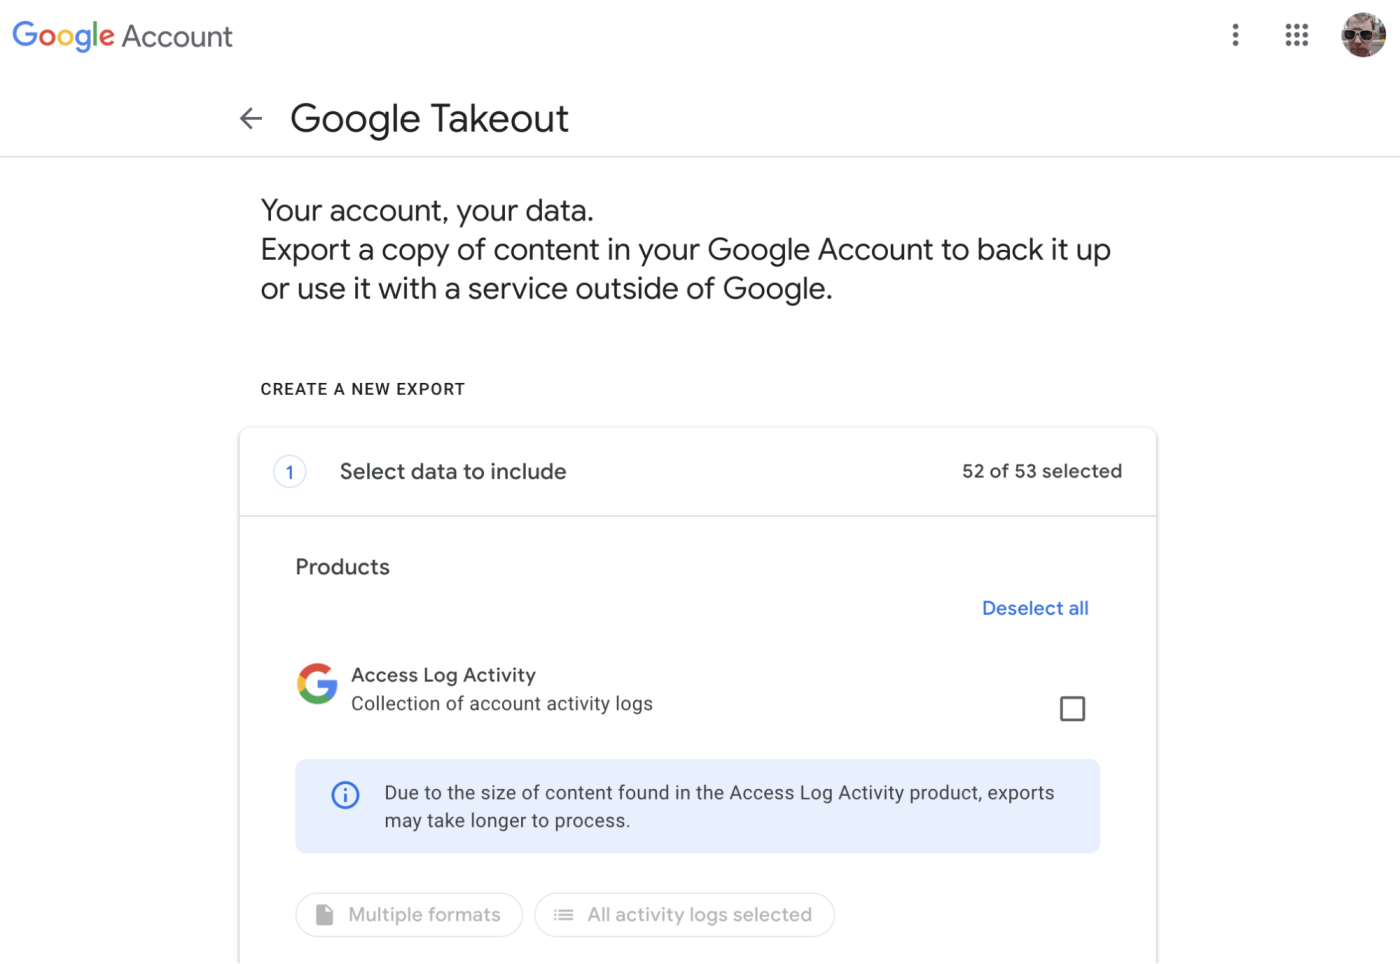 A screenshot of Google Taekout exporting a copy of the content in a Google account